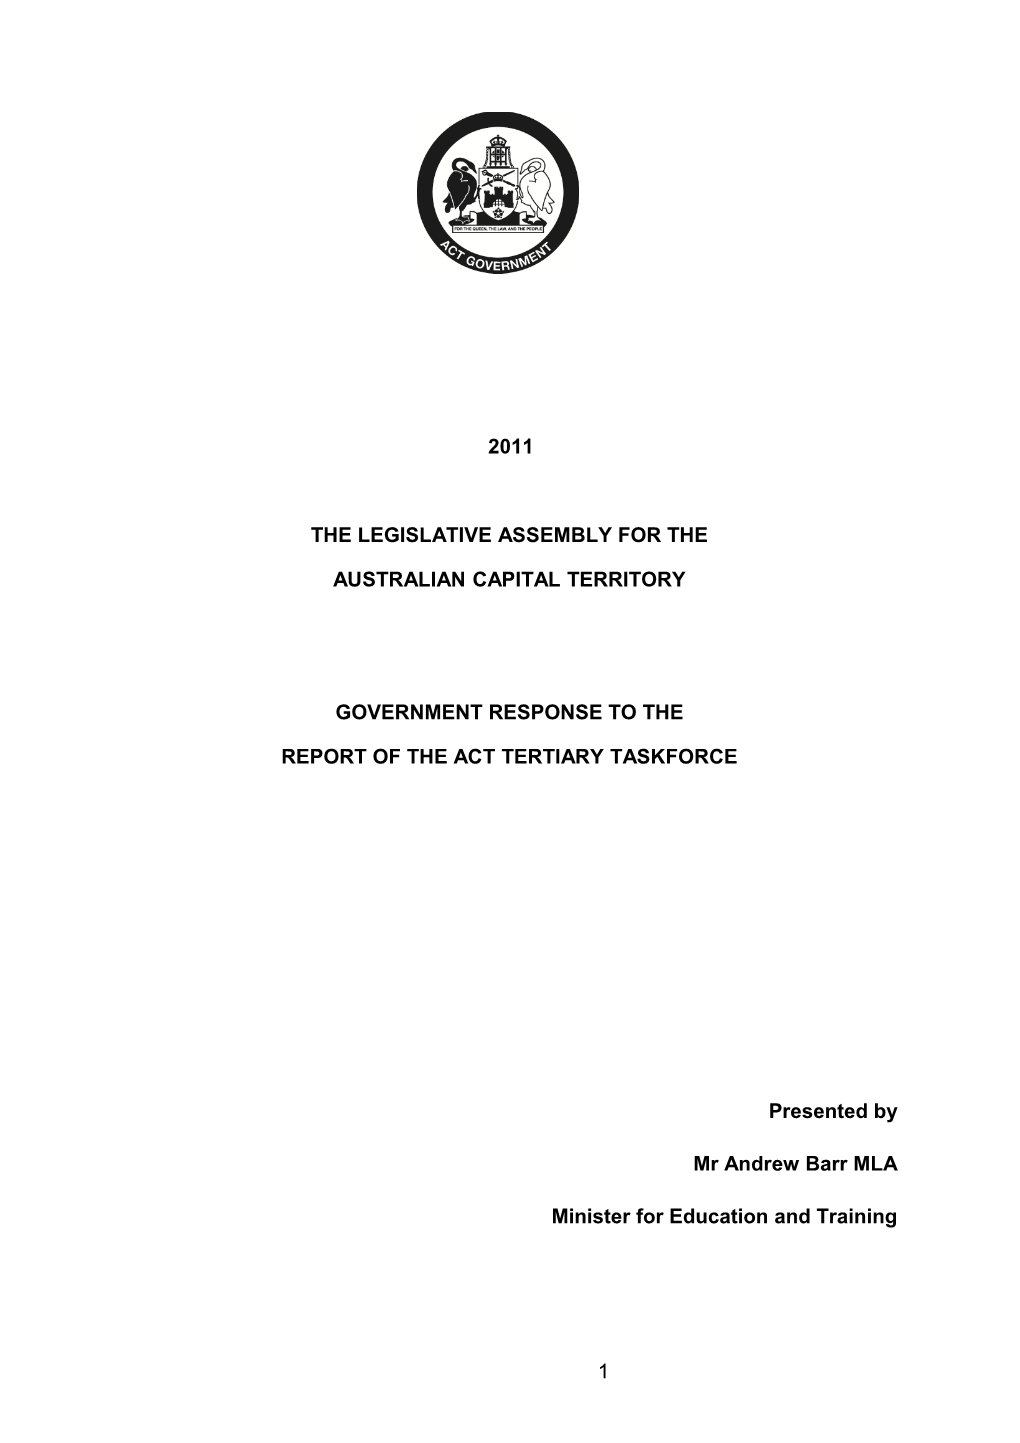 Government Response to Thereport of the Act Tertiary Taskforce